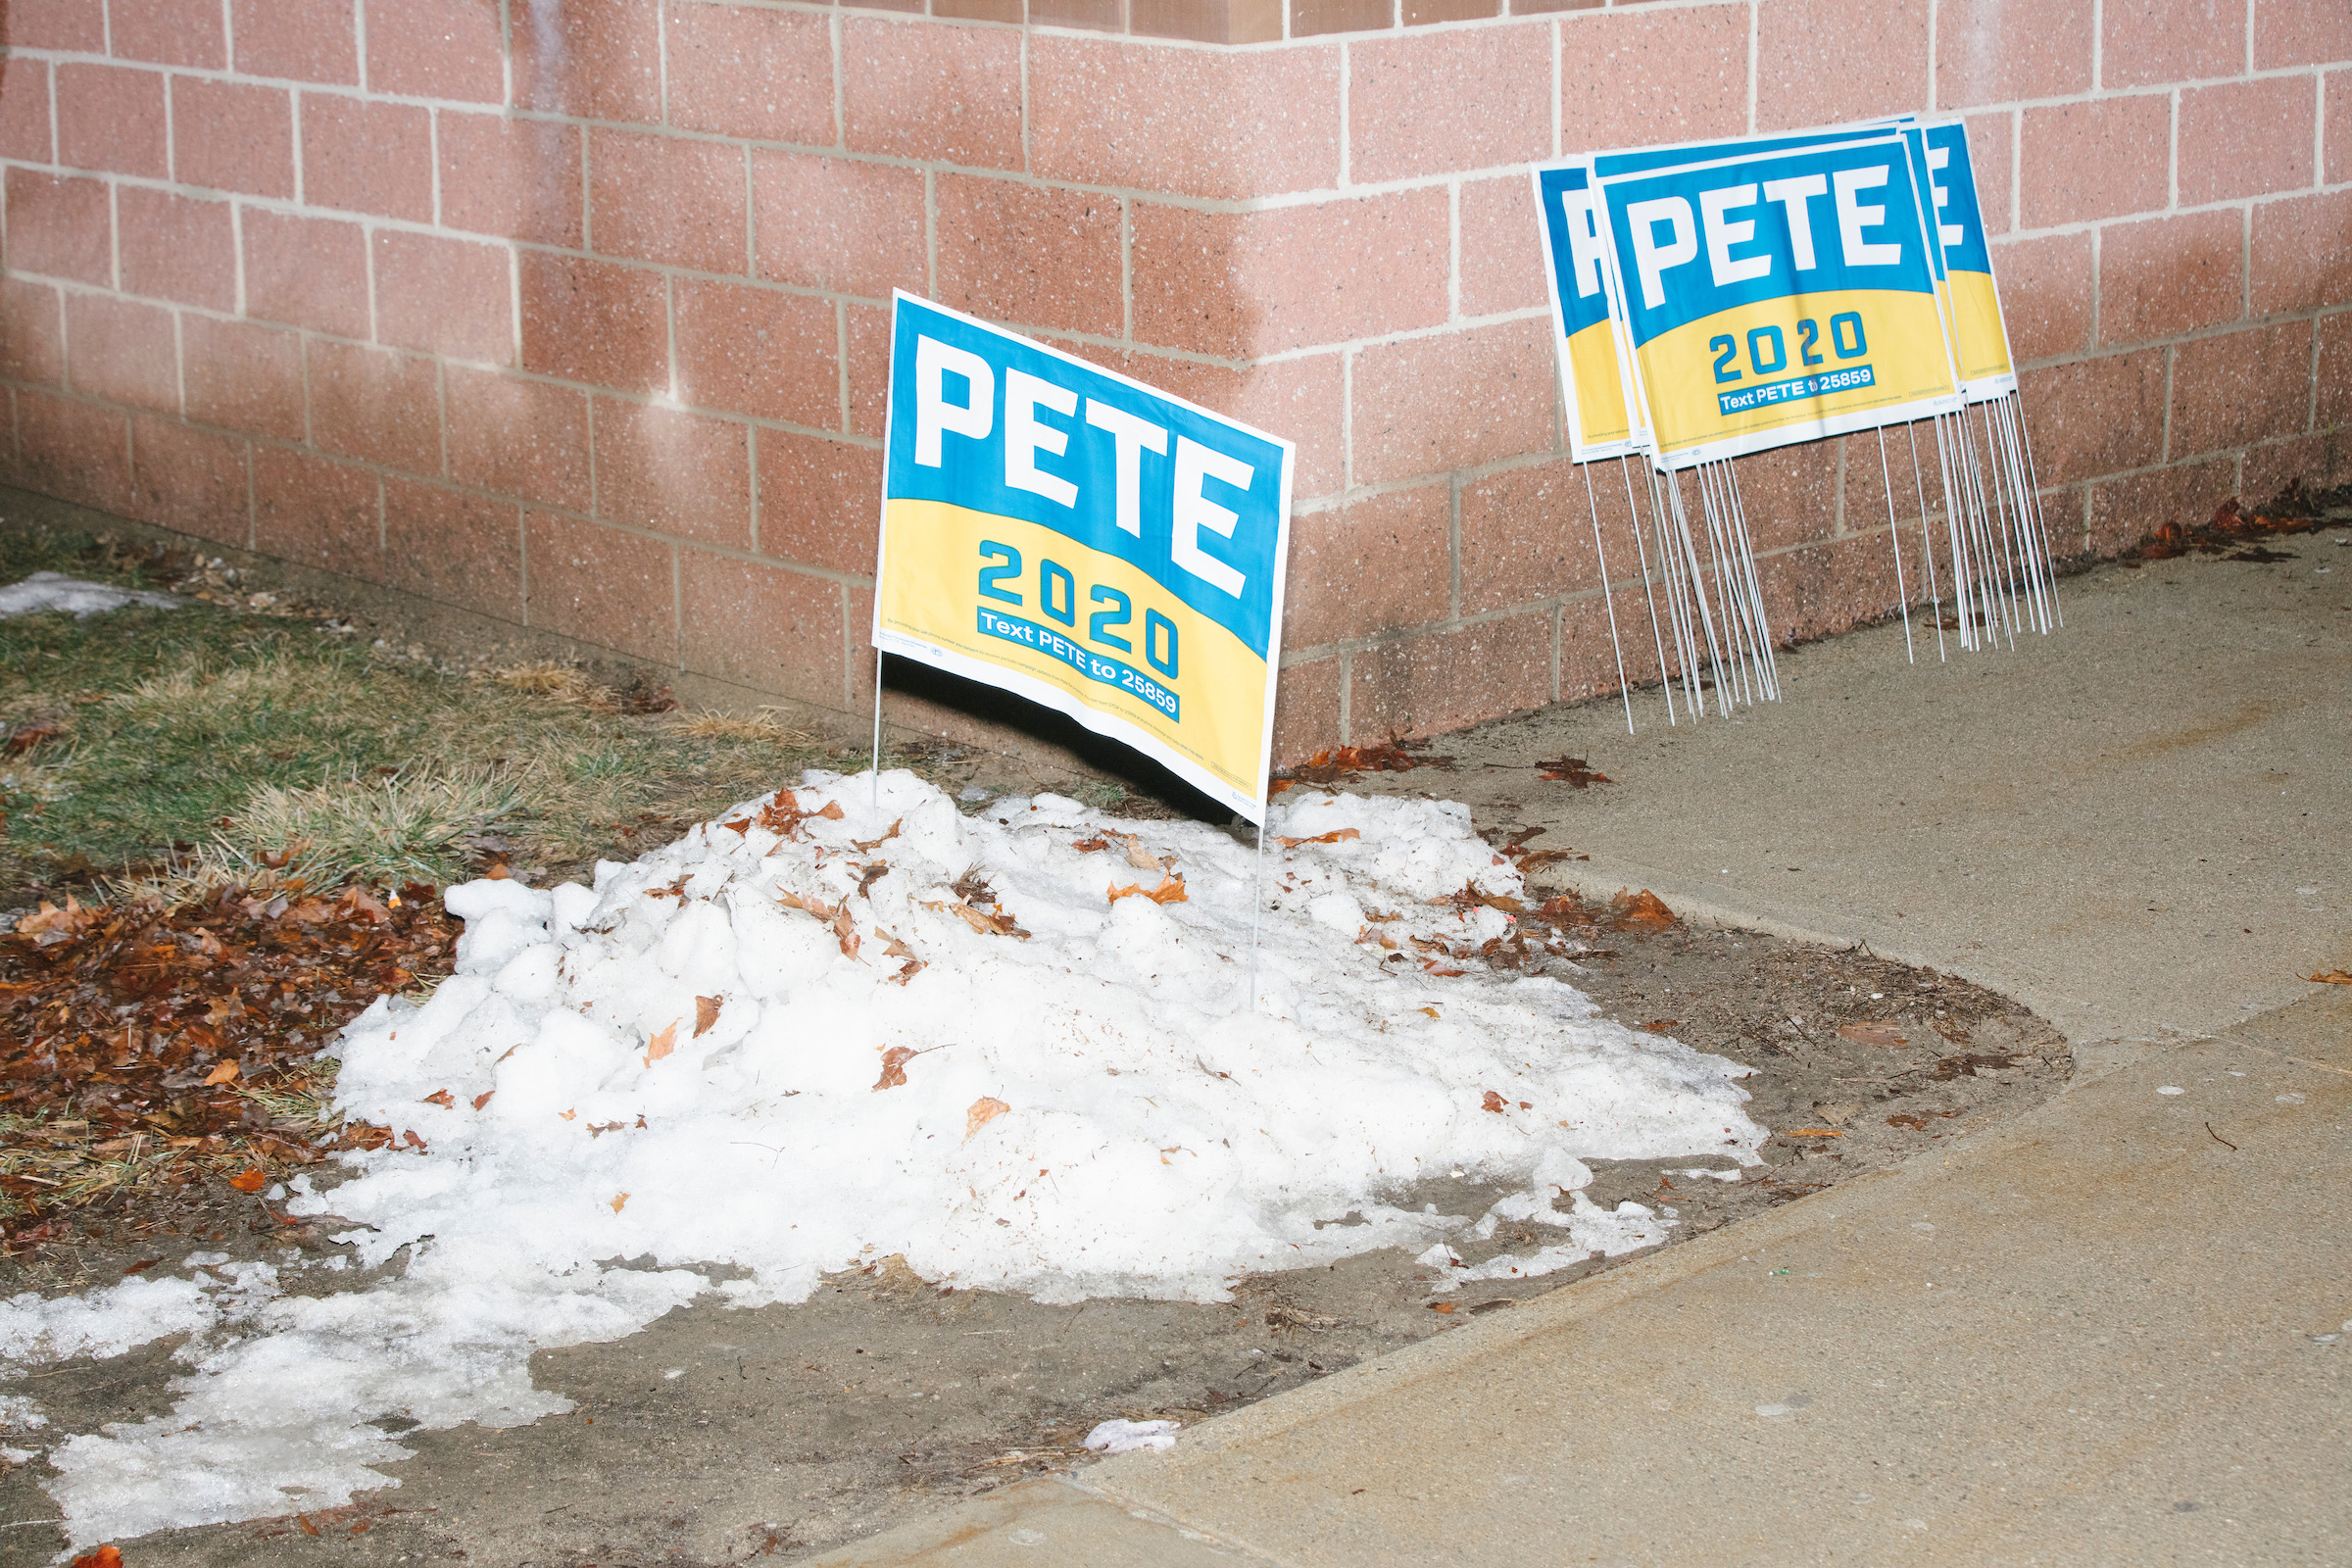 Campaign signs for Democratic presidential candidate and former South Bend, Ind., mayor Pete Buttigieg stand outside Exeter High School before a campaign rally in Exeter, N.H., on Feb. 10, 2020. (M. Scott Brauer for TIME)